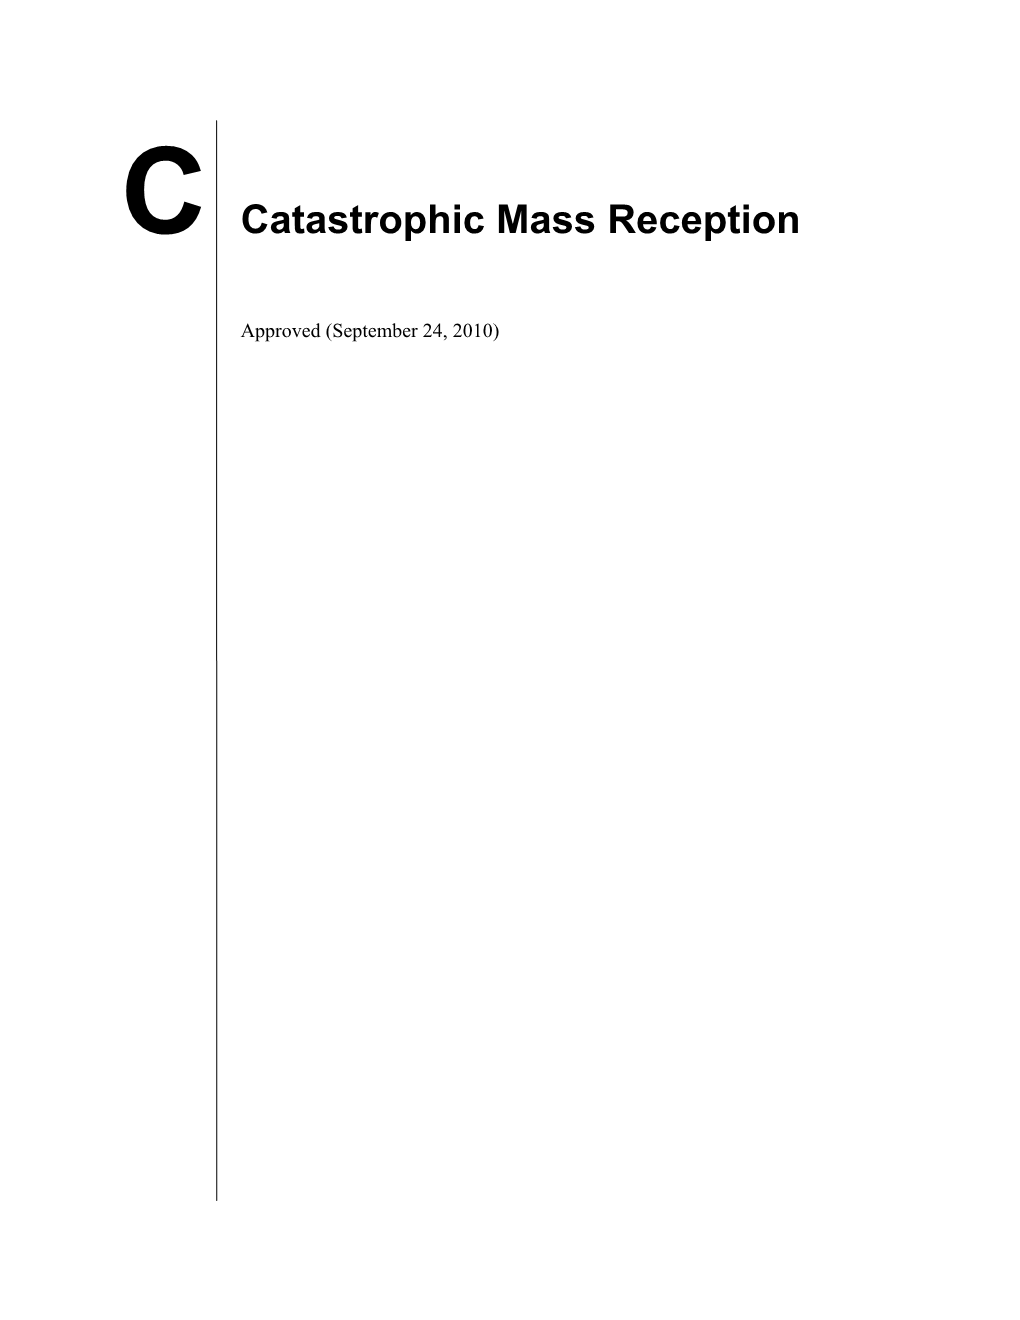 FA-C Catastrophic Mass Reception Approved-9 24 10